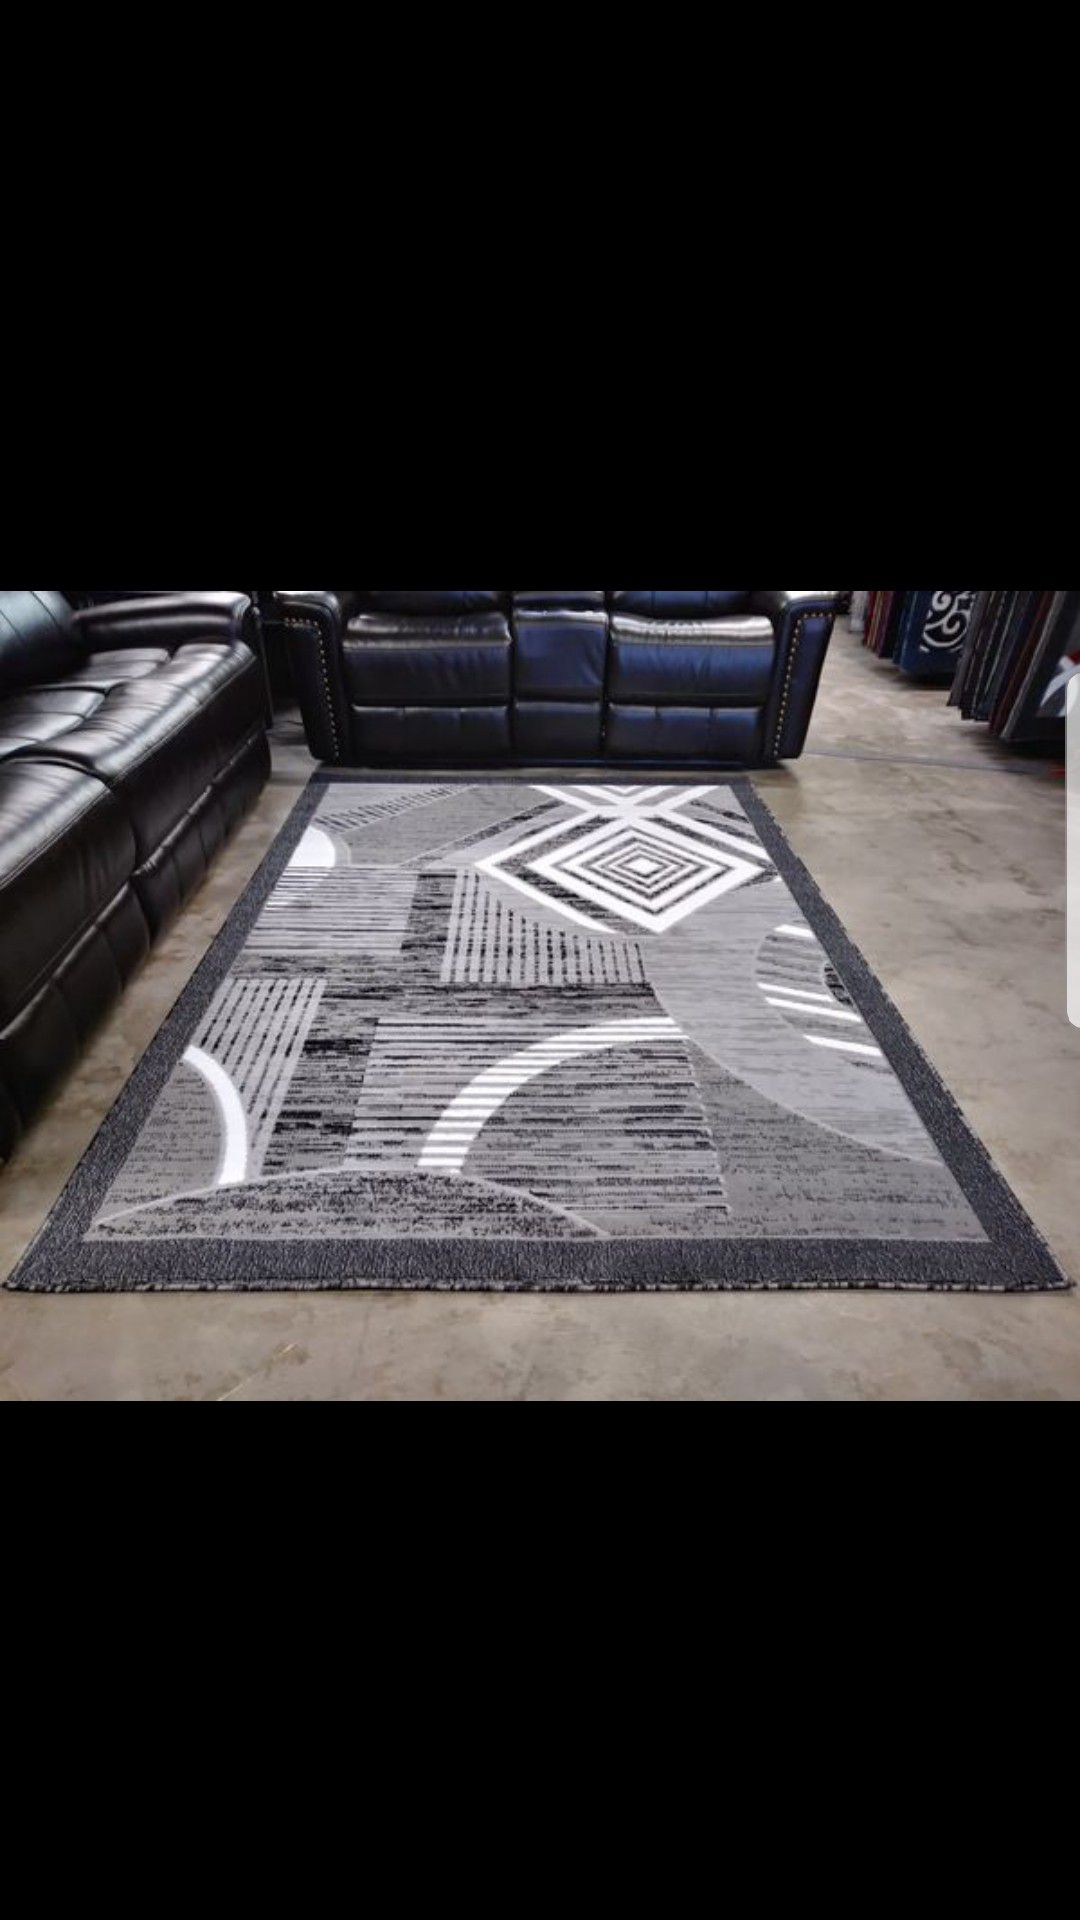 Brand New Modern Area rugs looks great on wooden floors